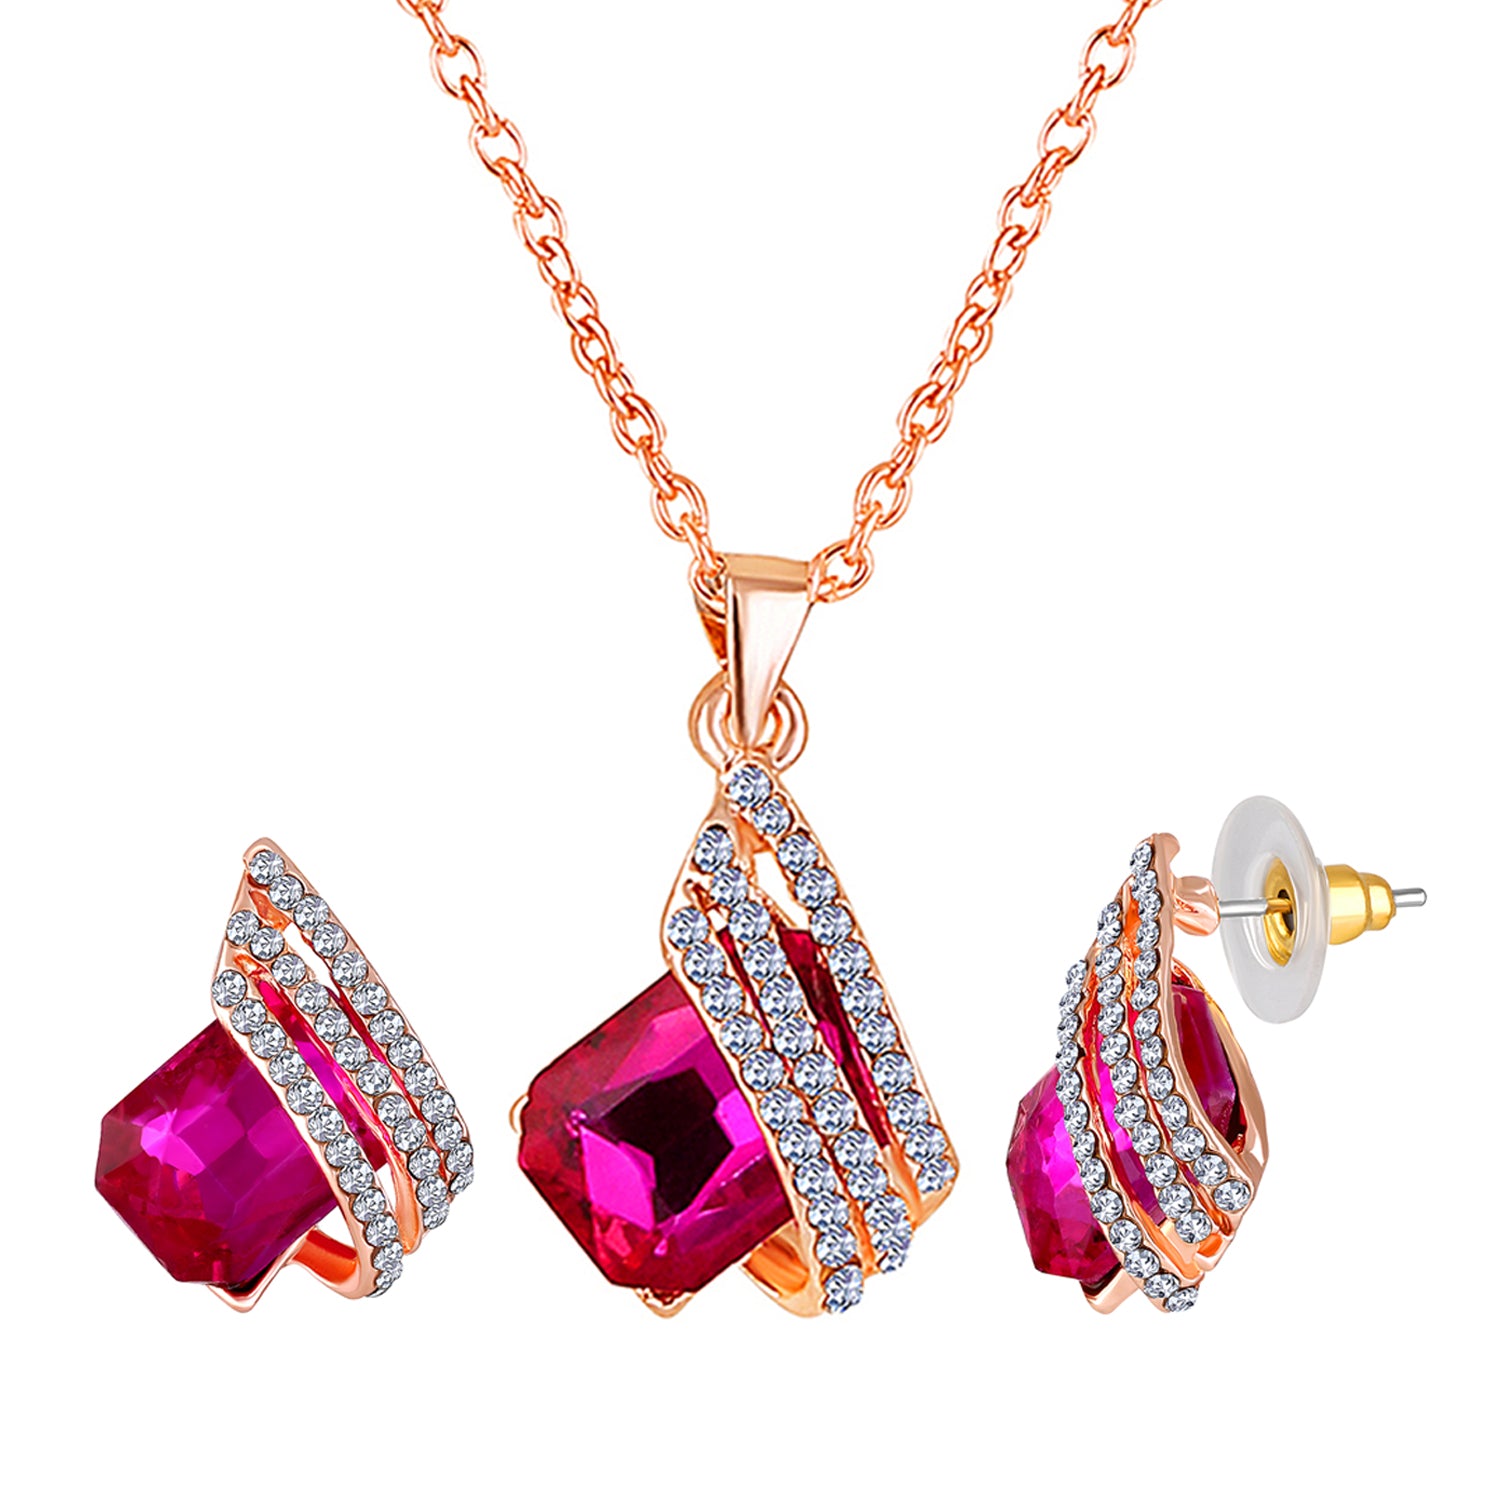 Shining Angel Wings Pink and White Crystal Pendant Necklace Earrings Set